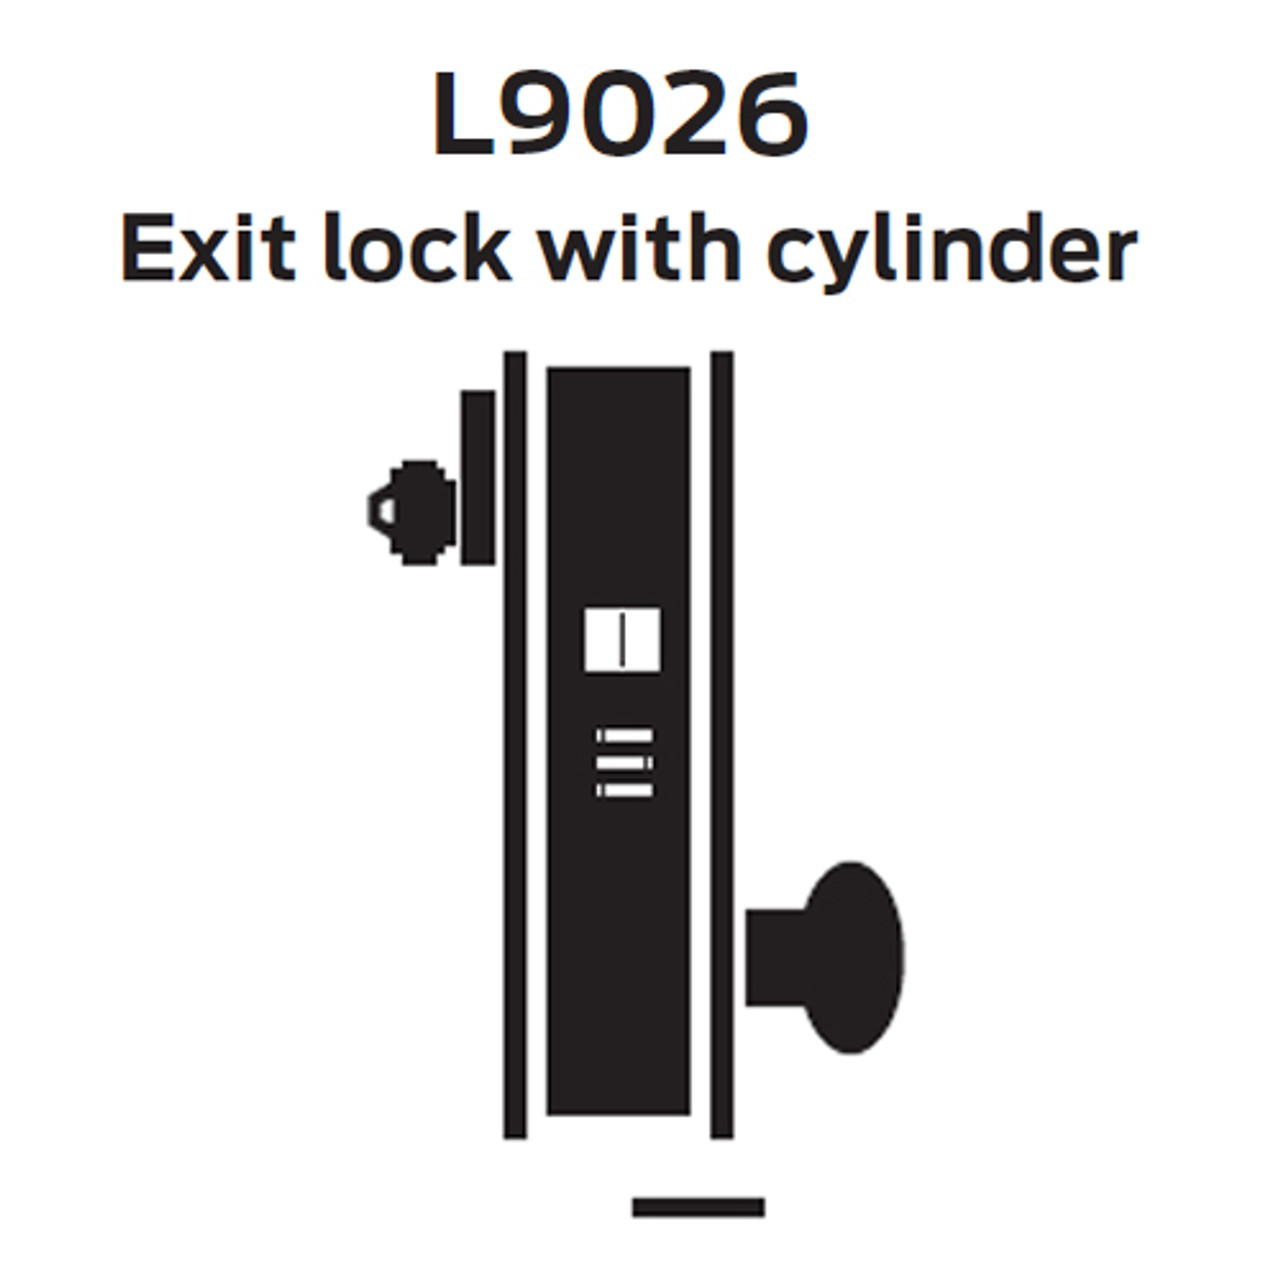 L9026L-02N-619 Schlage L Series Less Cylinder Exit Lock with Cylinder Commercial Mortise Lock with 02 Cast Lever Design in Satin Nickel